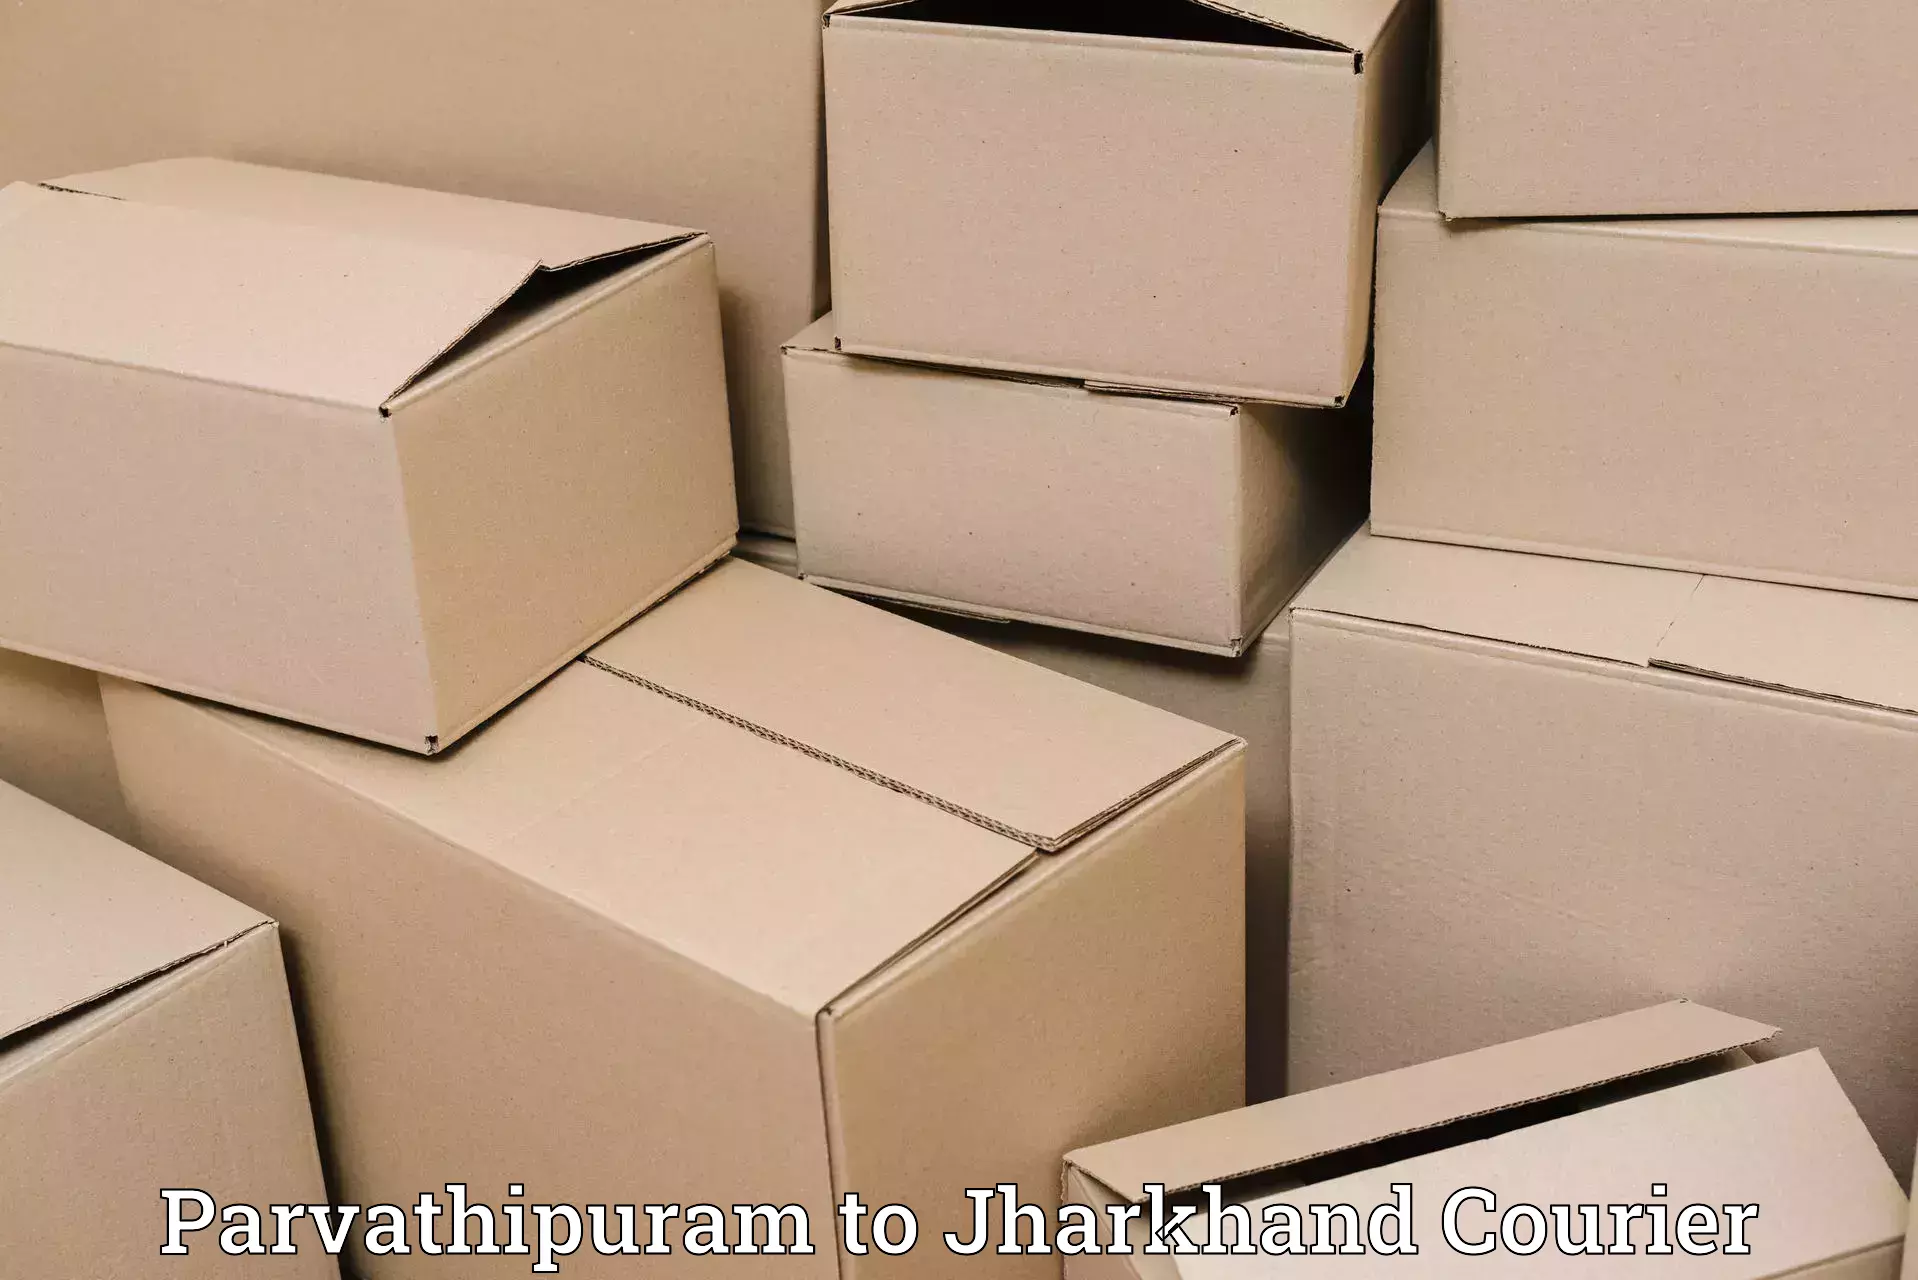 Sustainable courier practices in Parvathipuram to Jharkhand